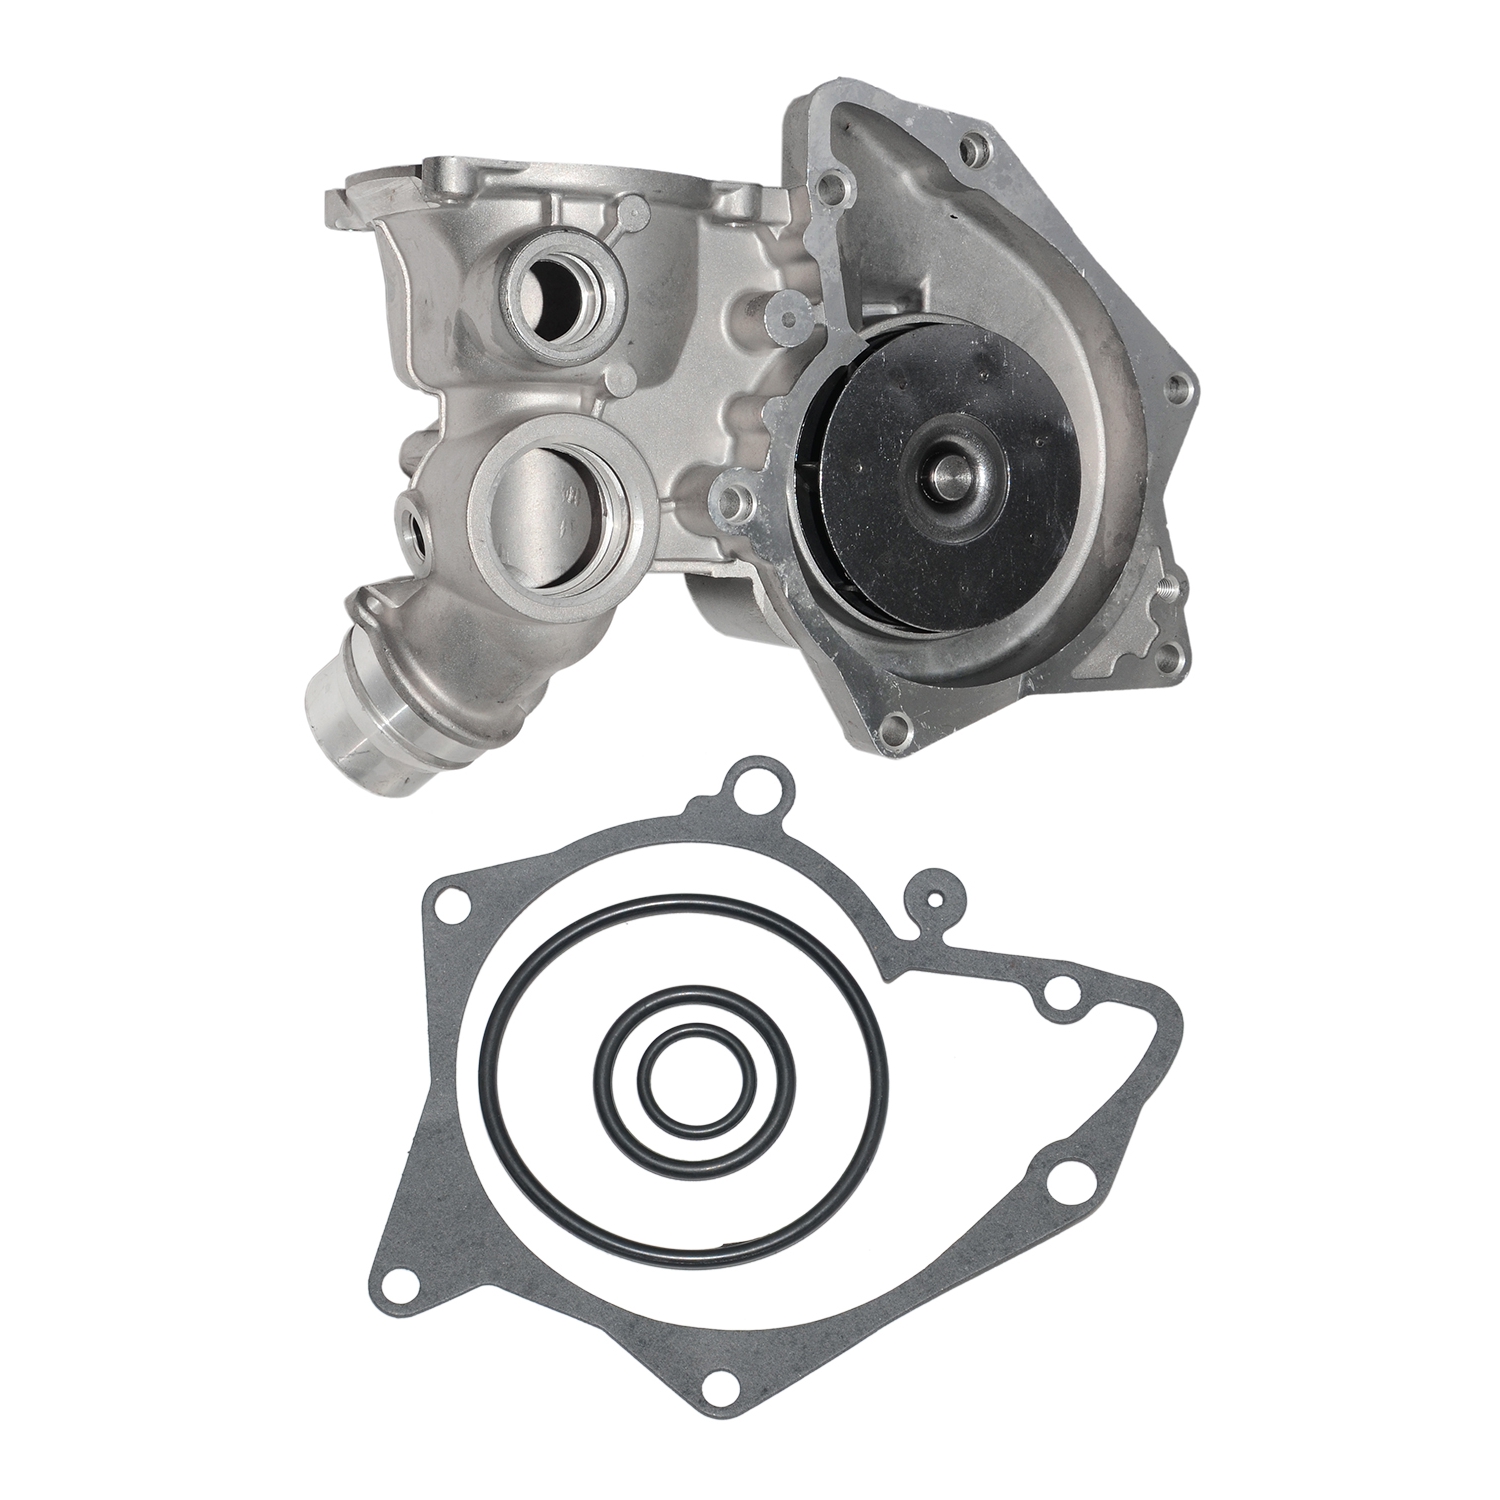 11510393336 For BMW X5 E53 E39 E63 E64 540i 545i 645Ci 4.4L Water Pump 11511713266 11511742598 8510324 PEB000030 - image 4 of 10